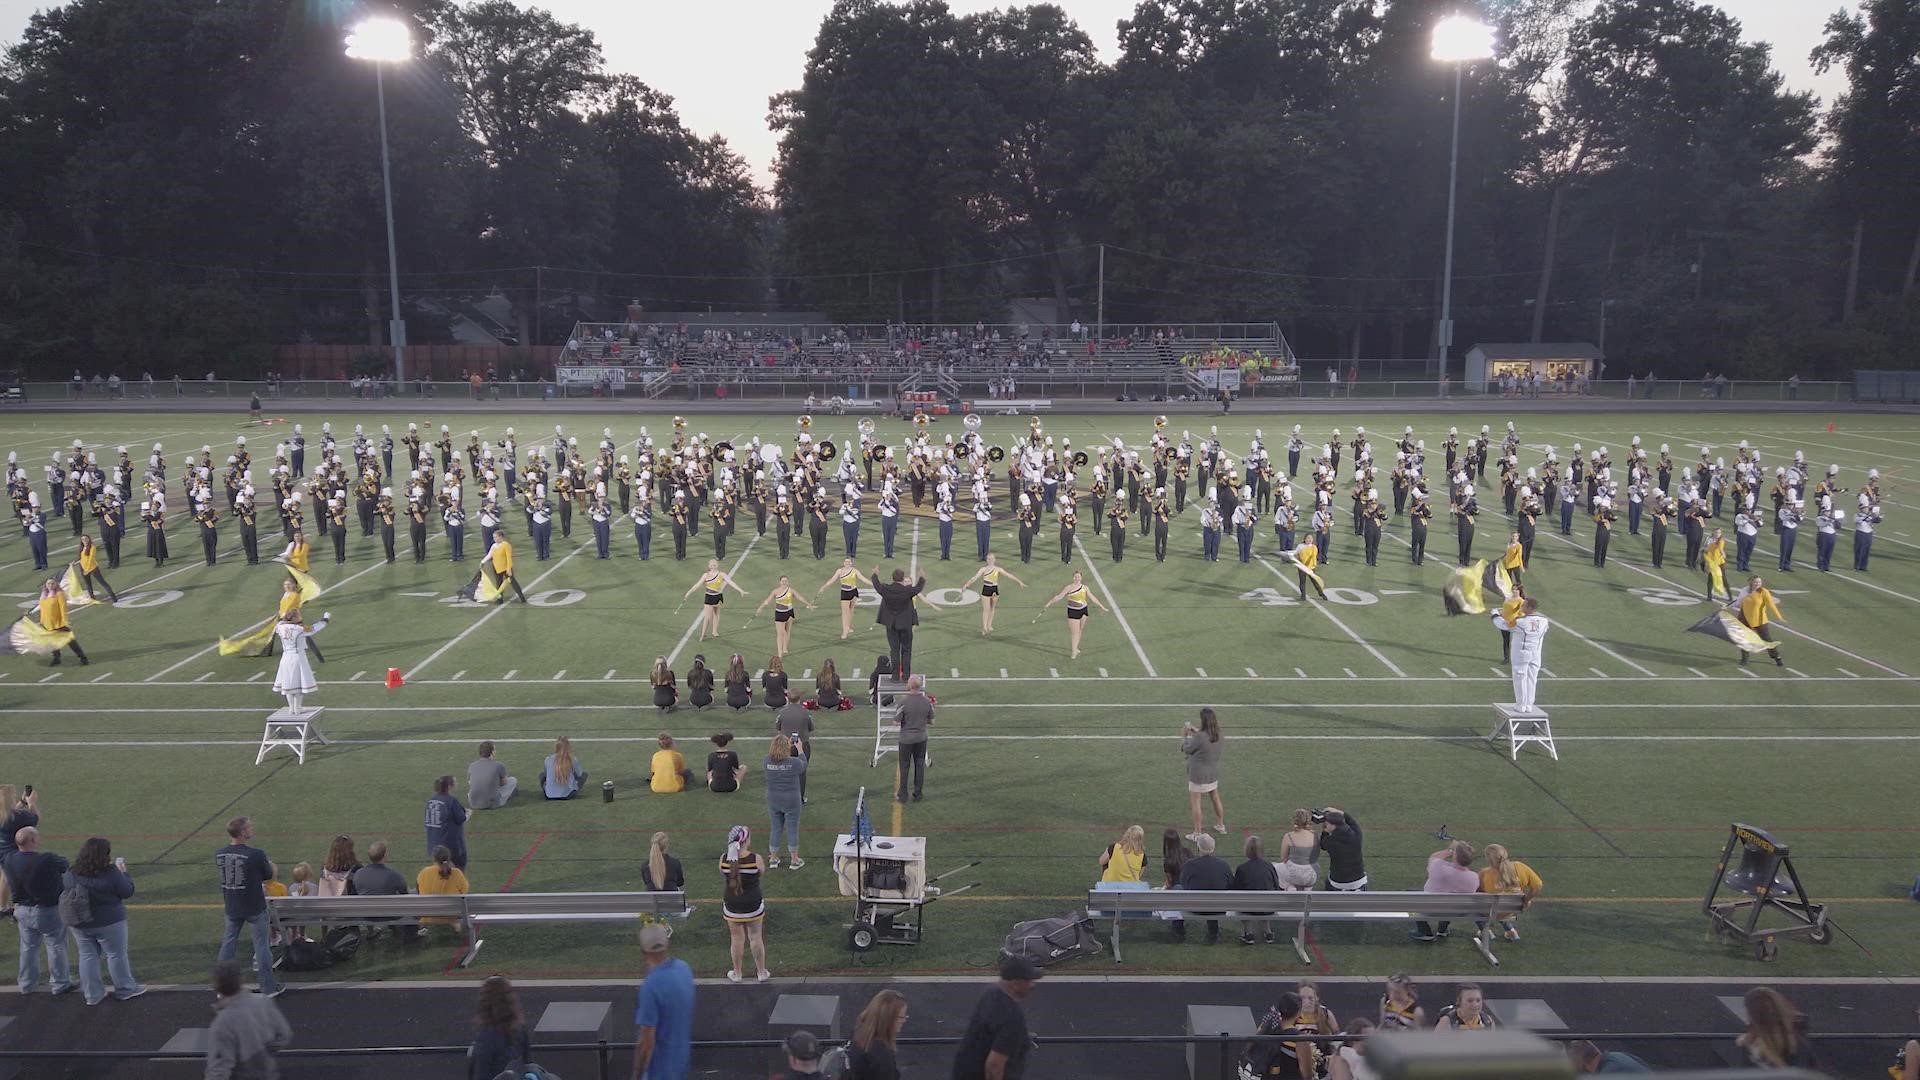 It's football season - or for those in the know, marching band season - and we're excited to feature a different band from the area each week!